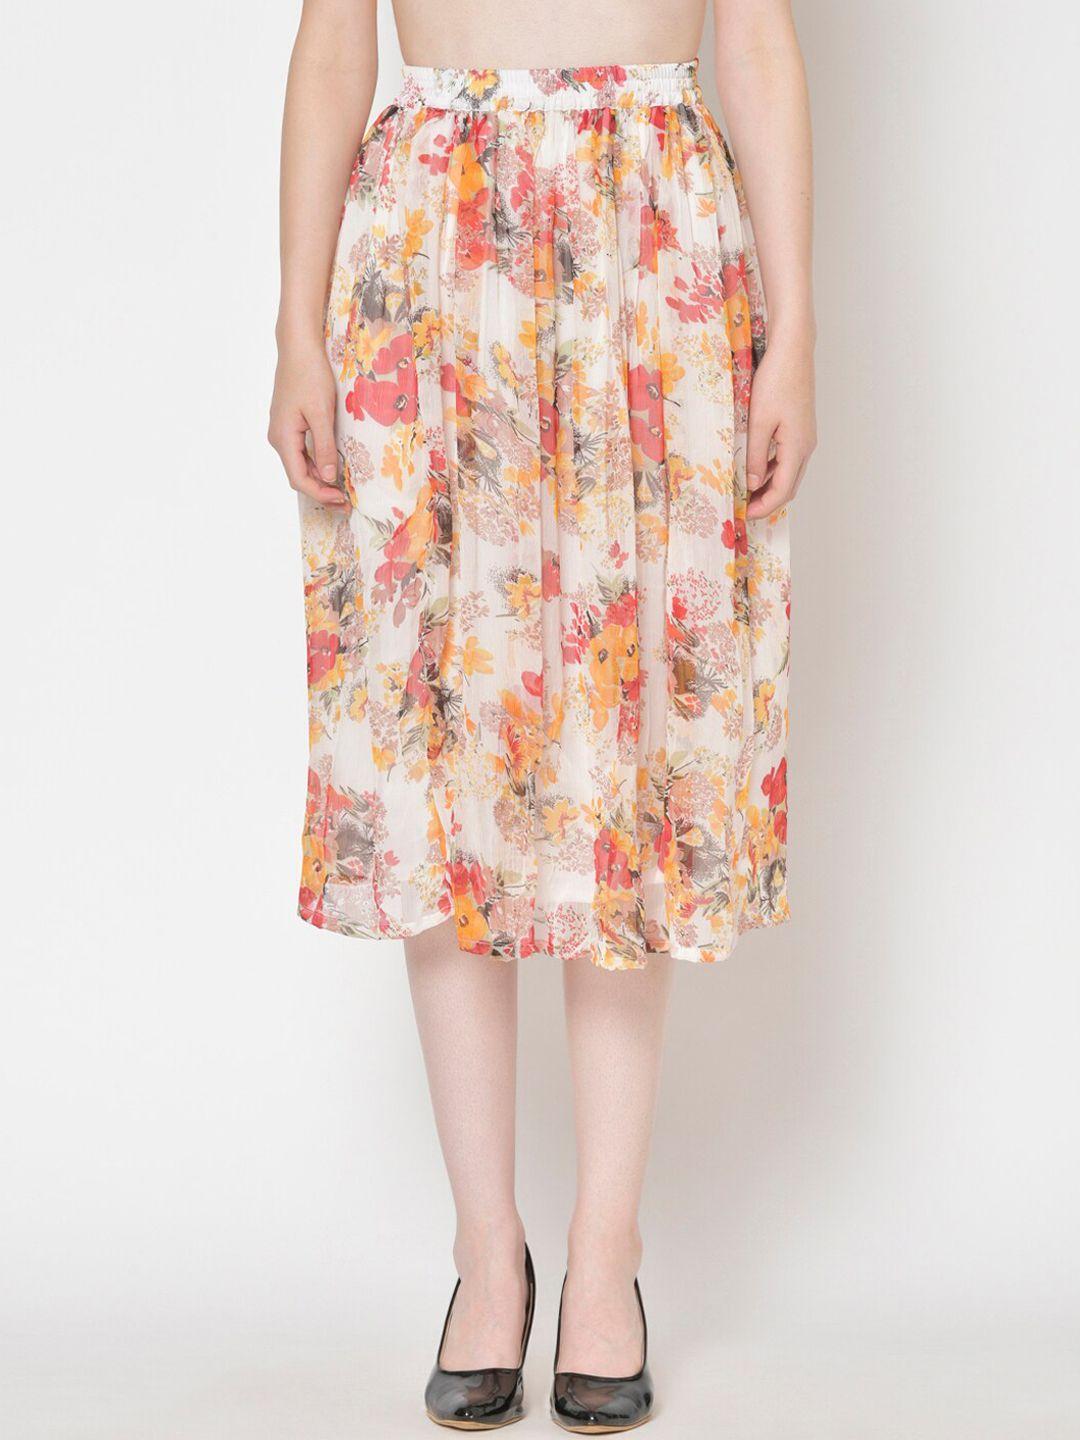 cation-white-&-yellow-floral-printed-flared-skirt